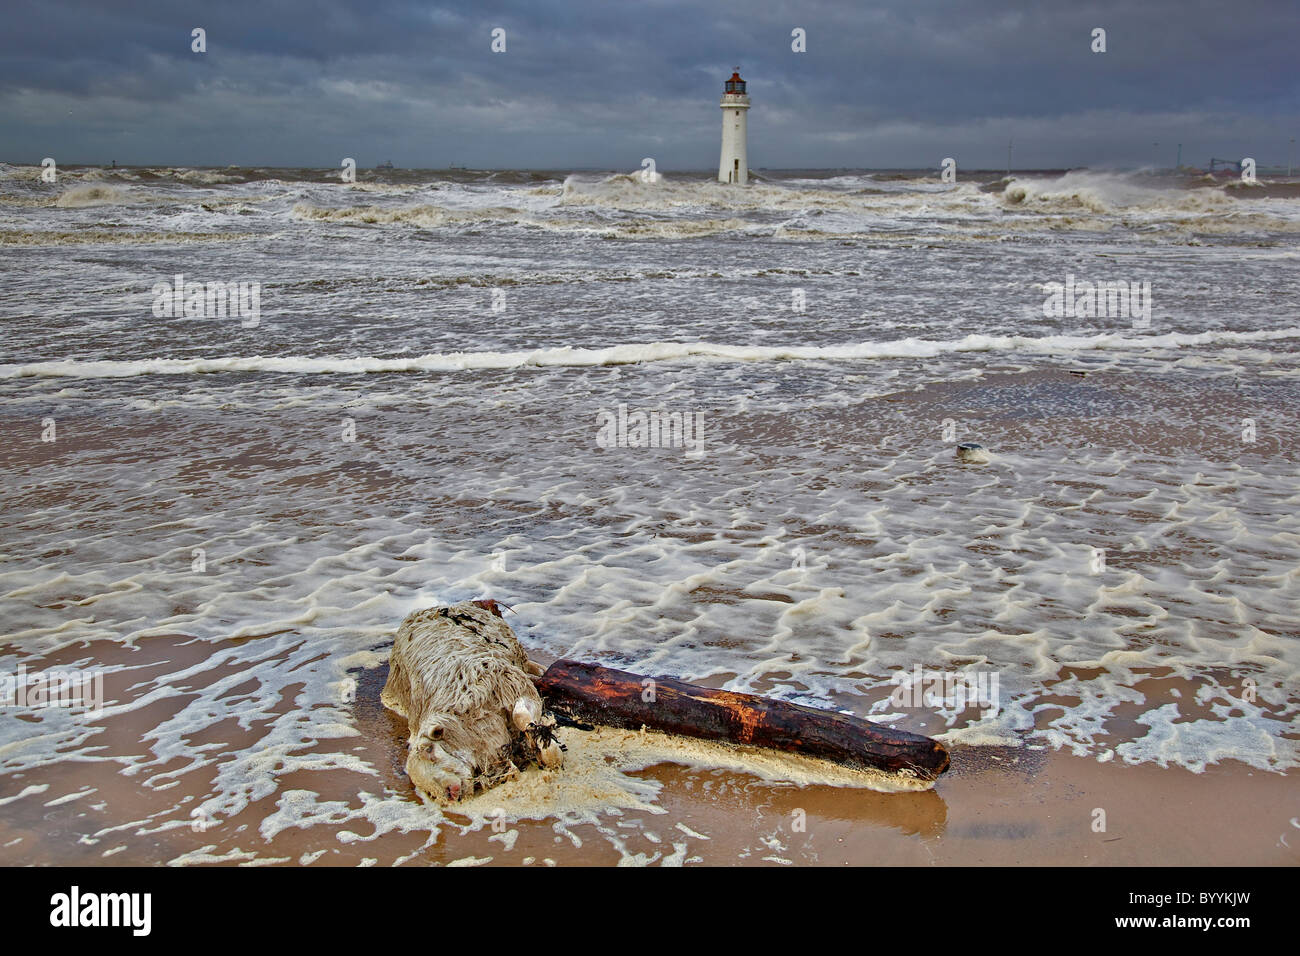 Dead sheep washed up on seashore beach. Stock Photo